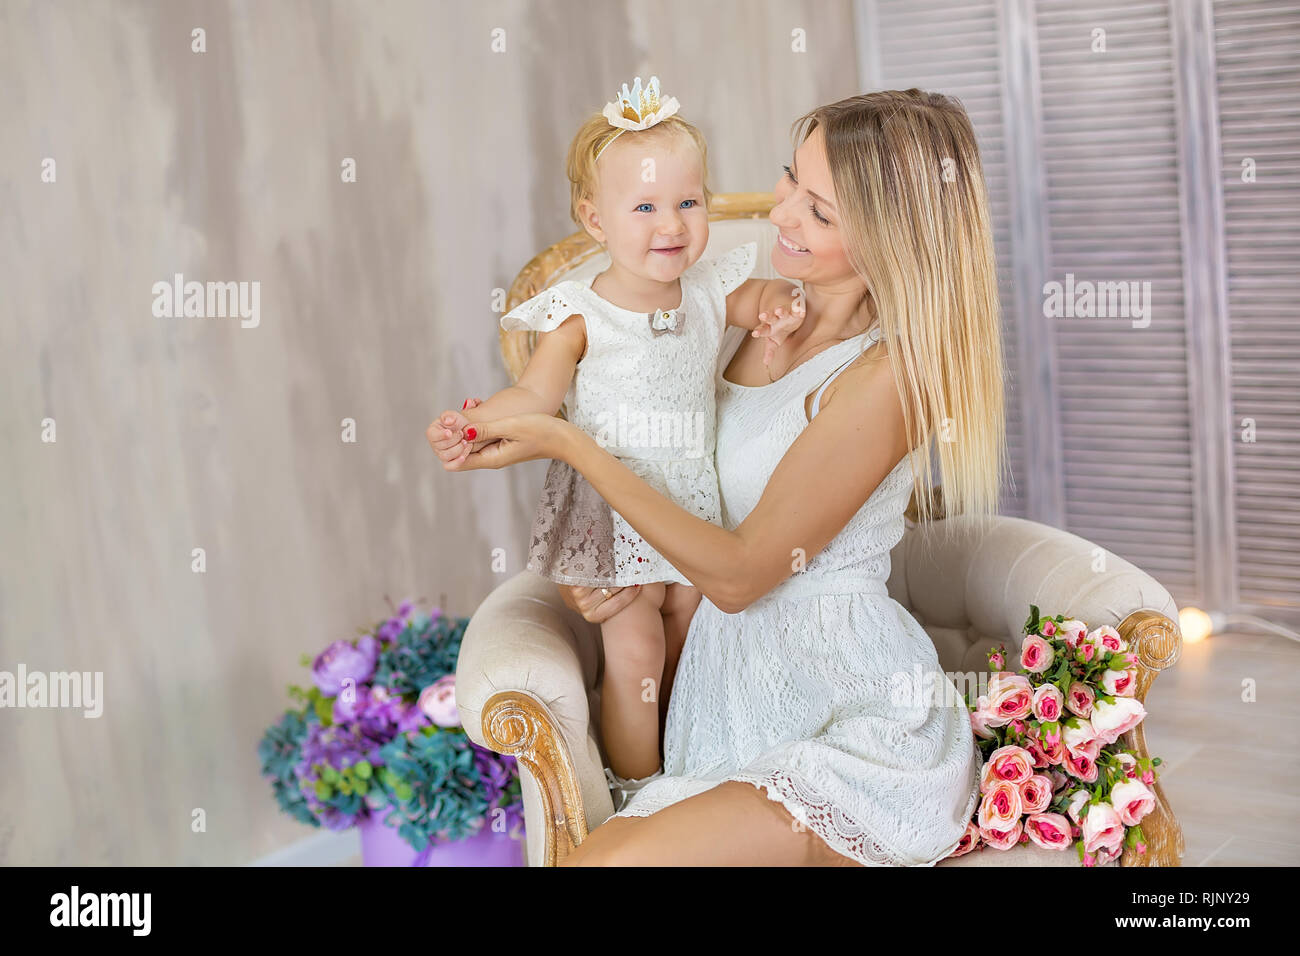 Portrait of mother and daughter lovely hugging each other posing on retro chair with bouquet of flowers Stock Photo